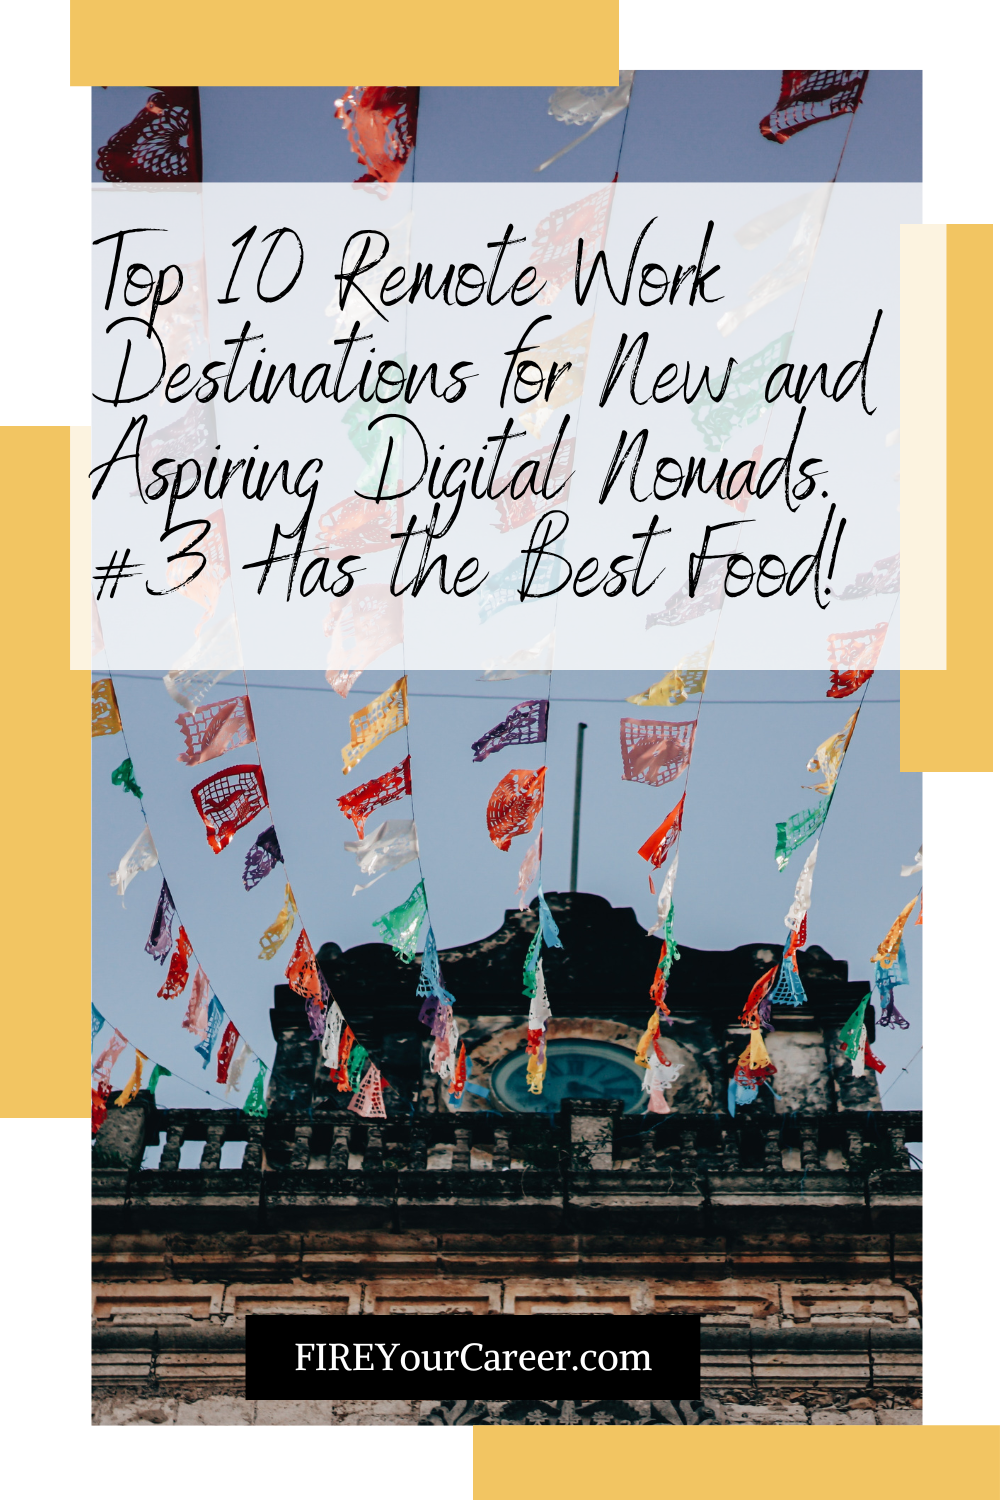 Top 10 Remote Work Destinations for New and Aspiring Digital Nomads. #3 Has the Best Food! Pinterest